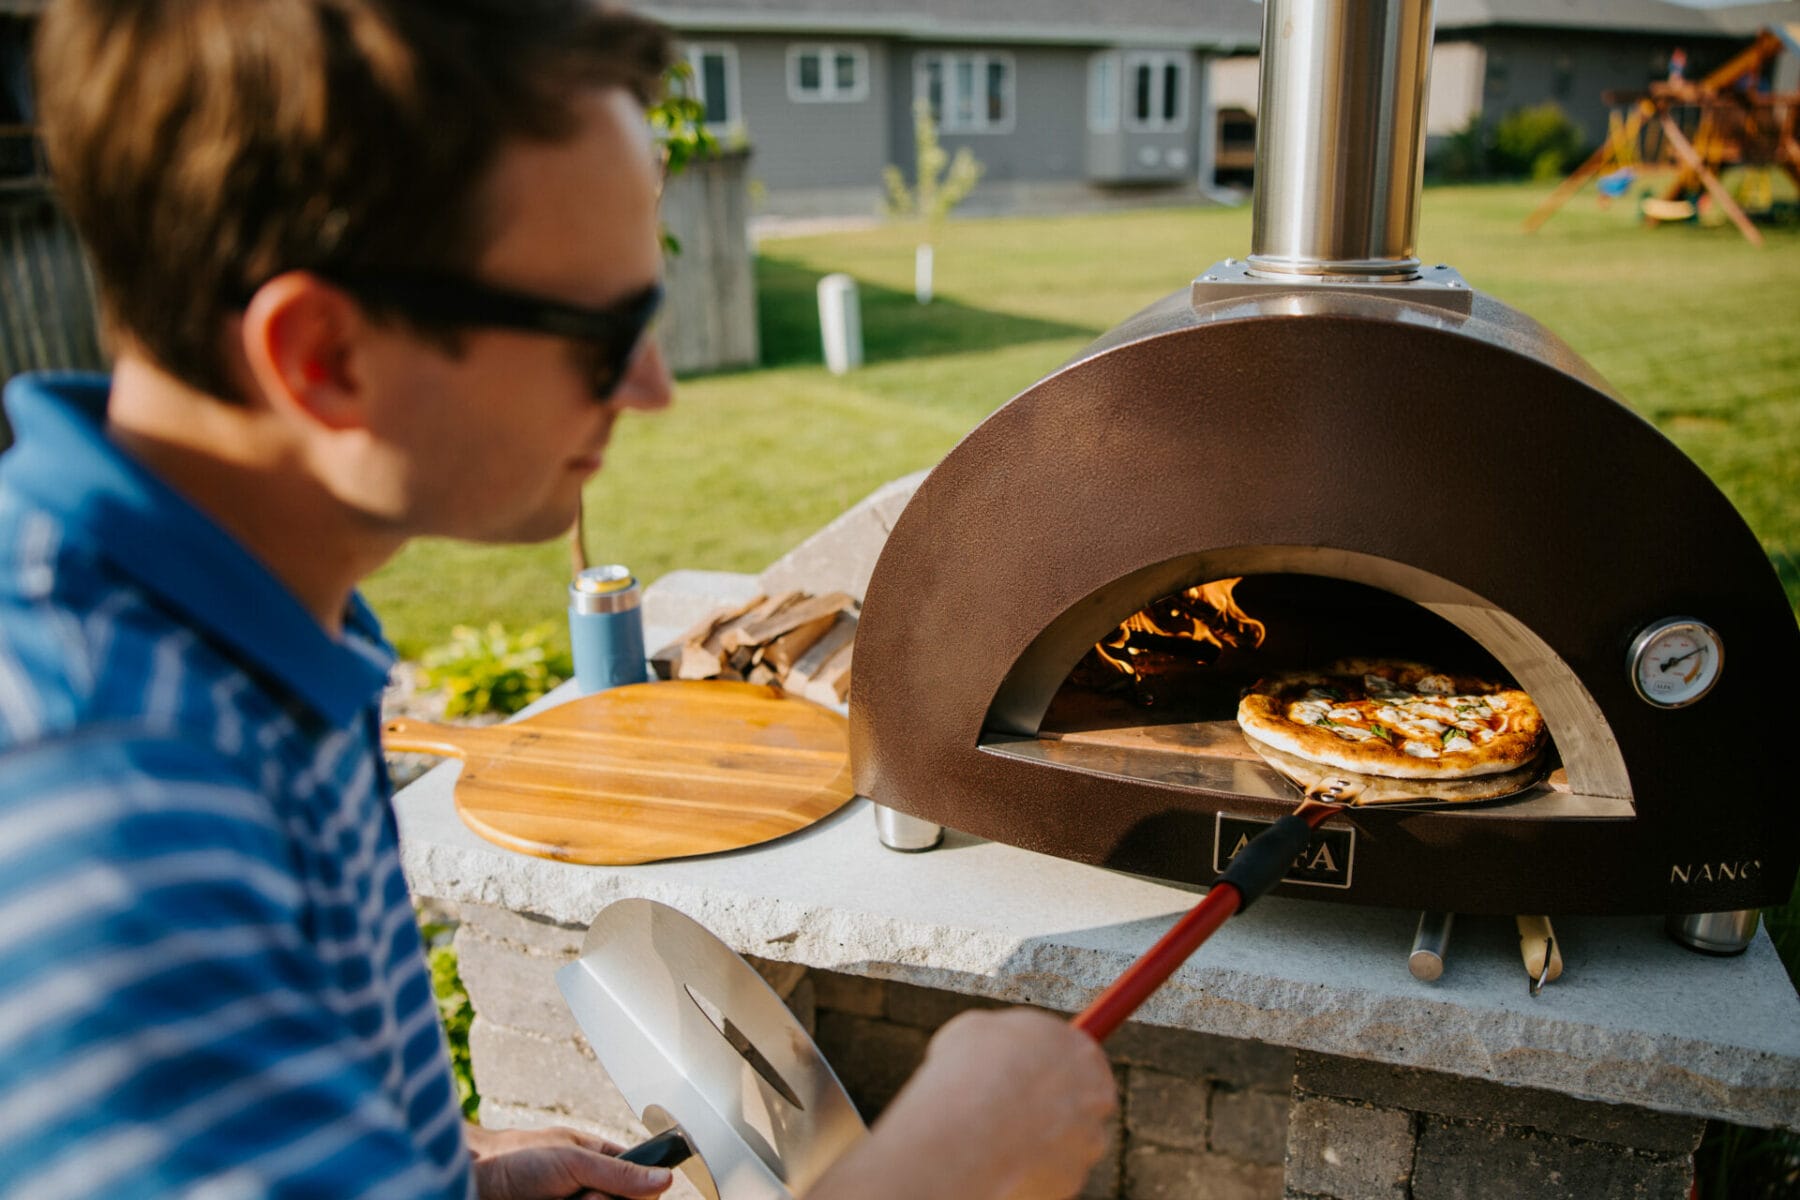 man removes pizza from his outdoor pizza oven